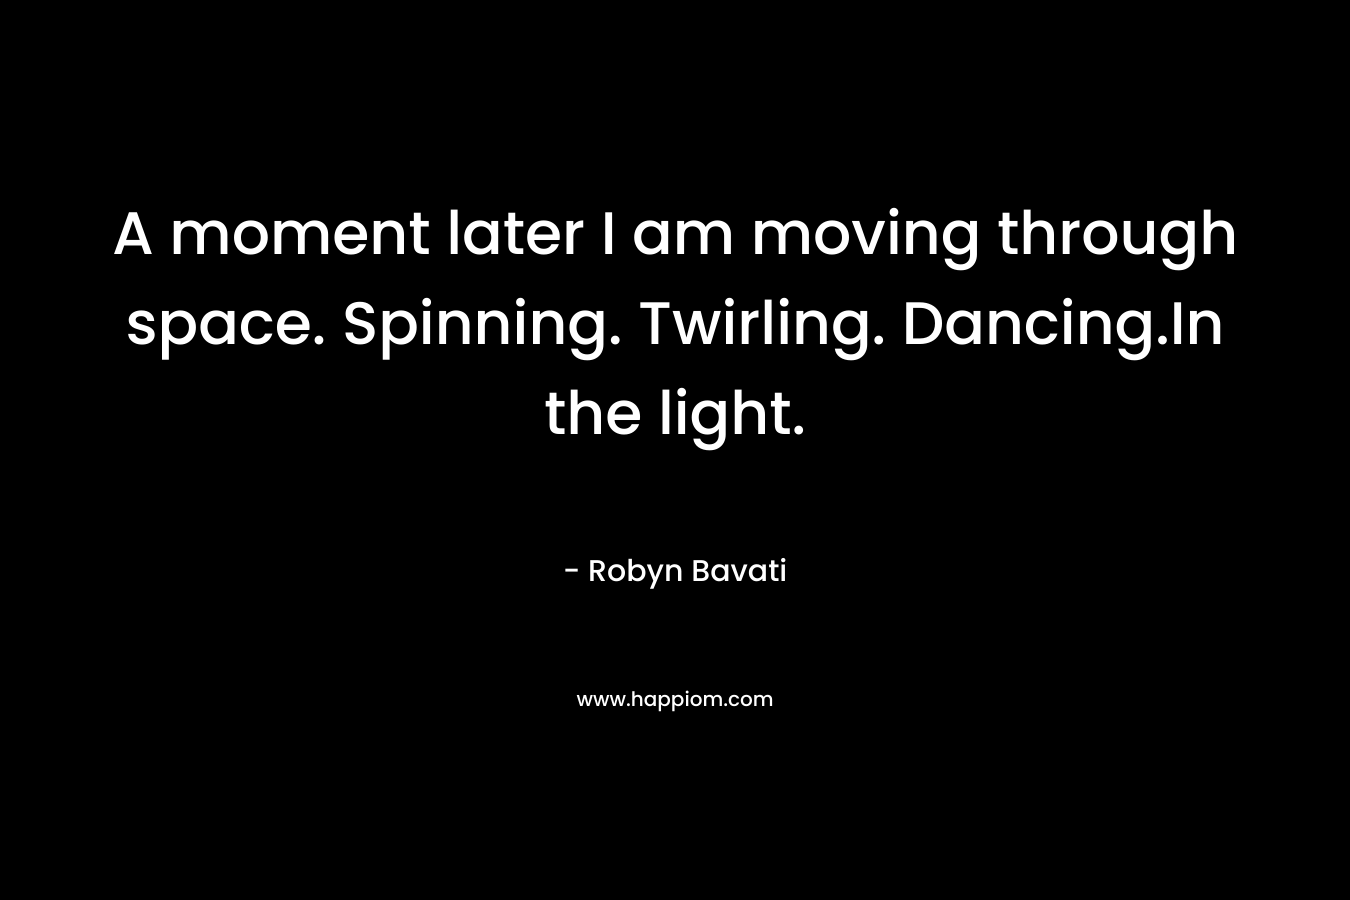 A moment later I am moving through space. Spinning. Twirling. Dancing.In the light.